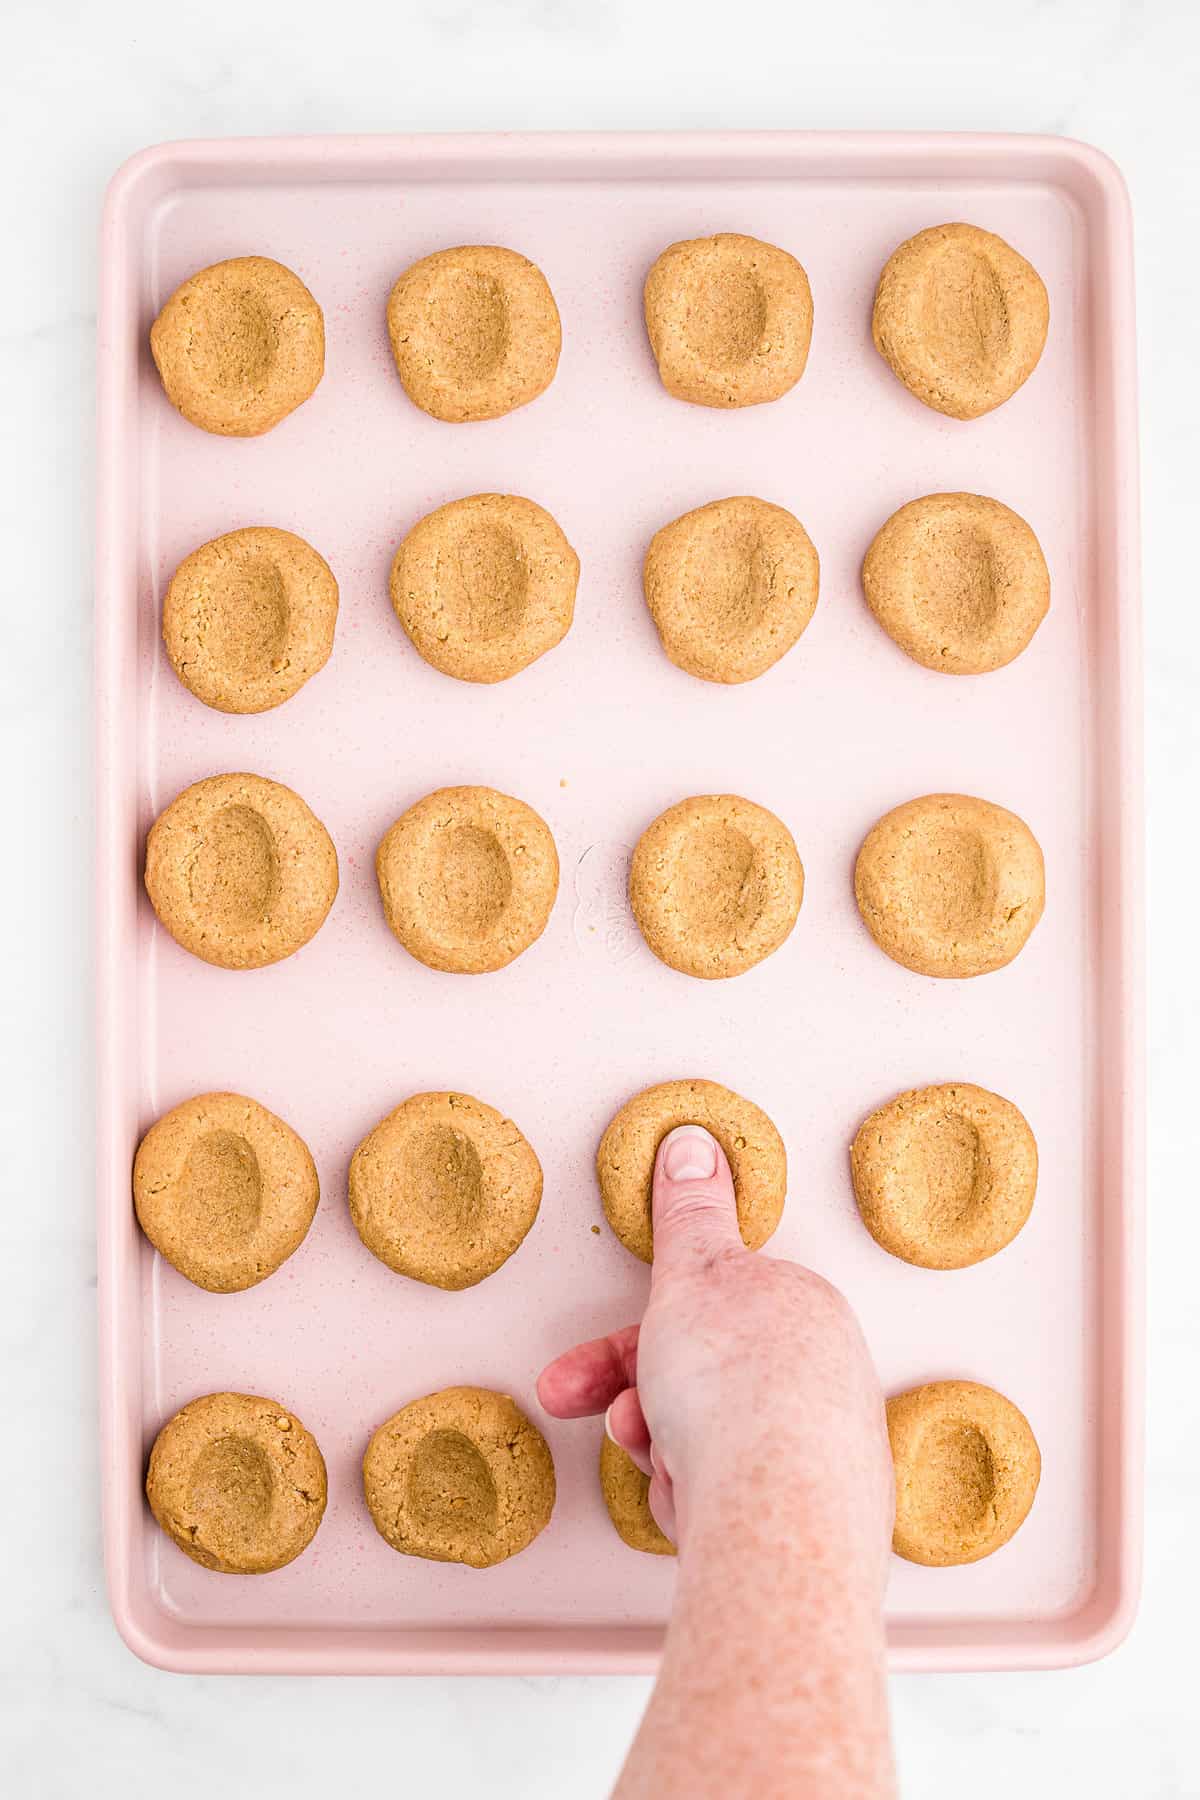 Push a thumbprint in each of the cookie balls. Bake cookies for 10 minutes